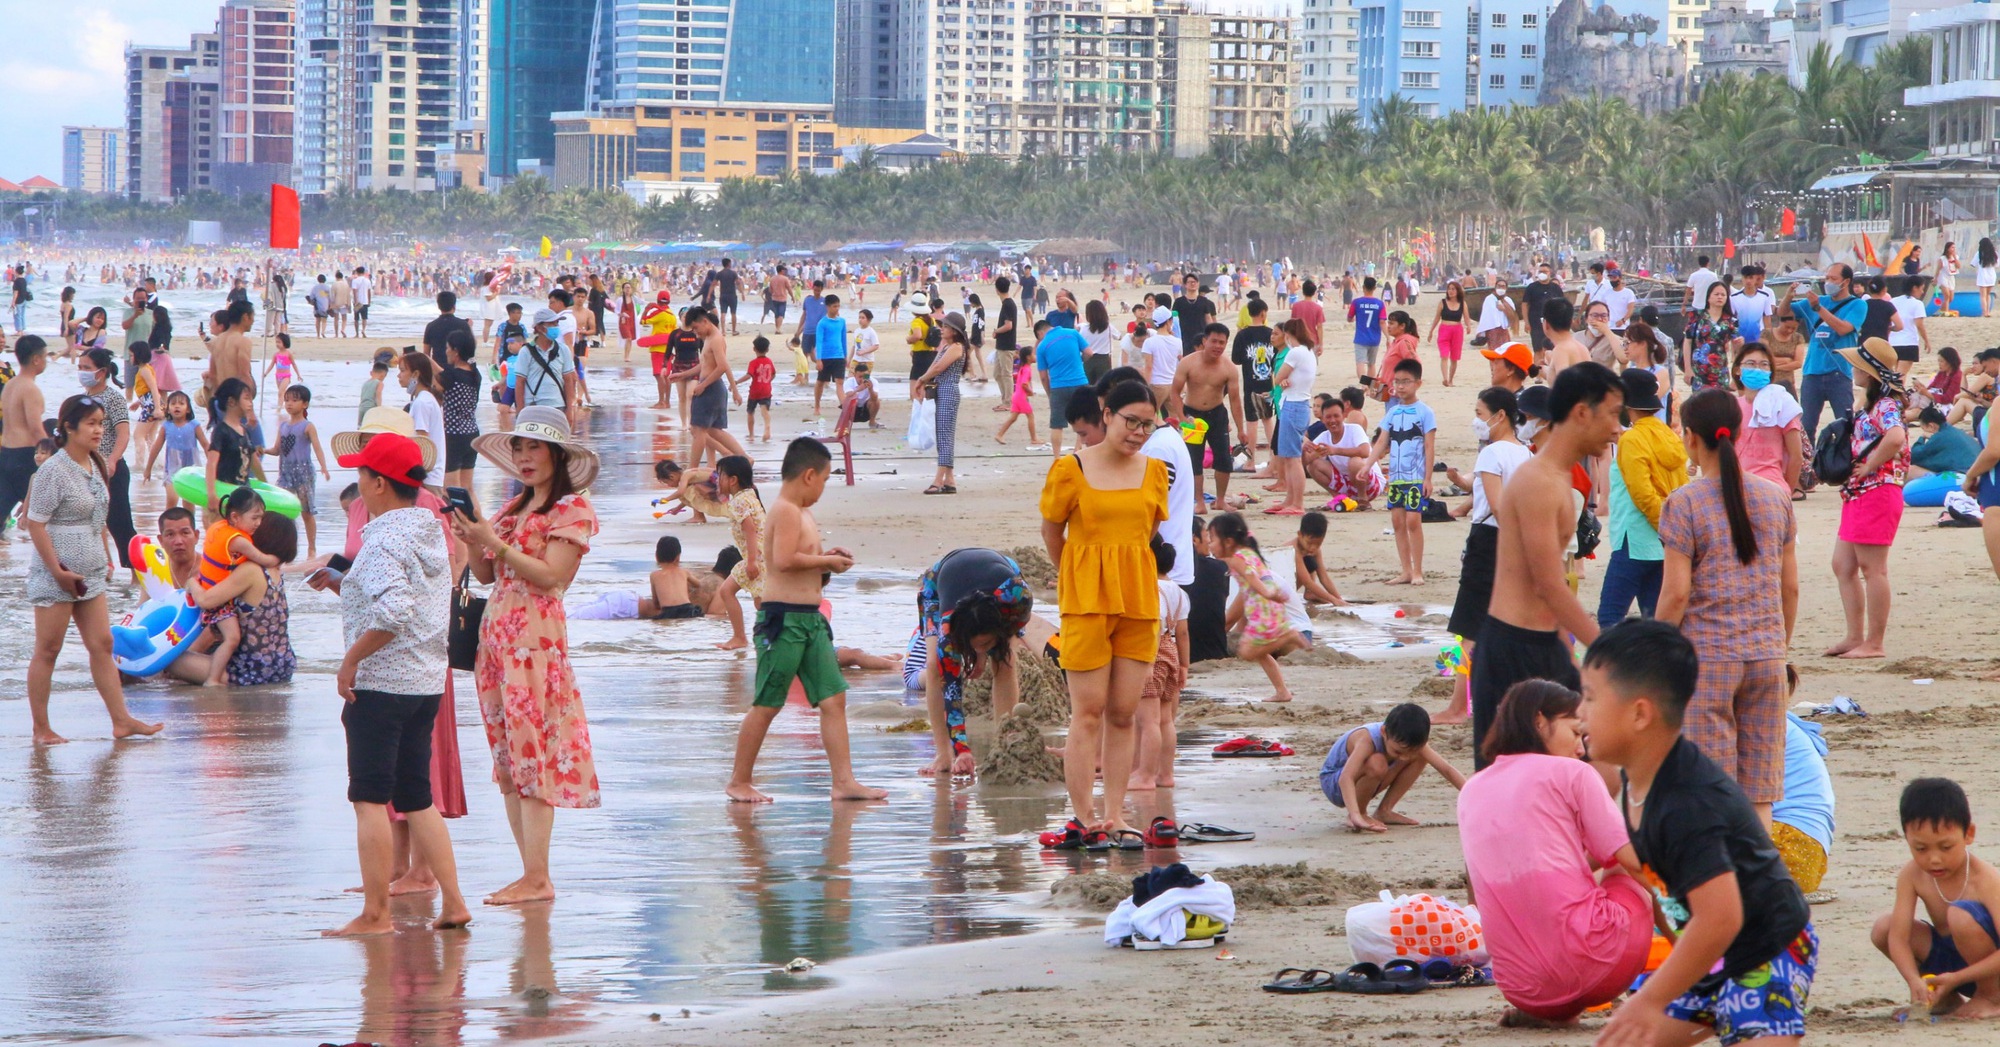 On the 30/4 holiday, tourists flock to Da Nang beaches